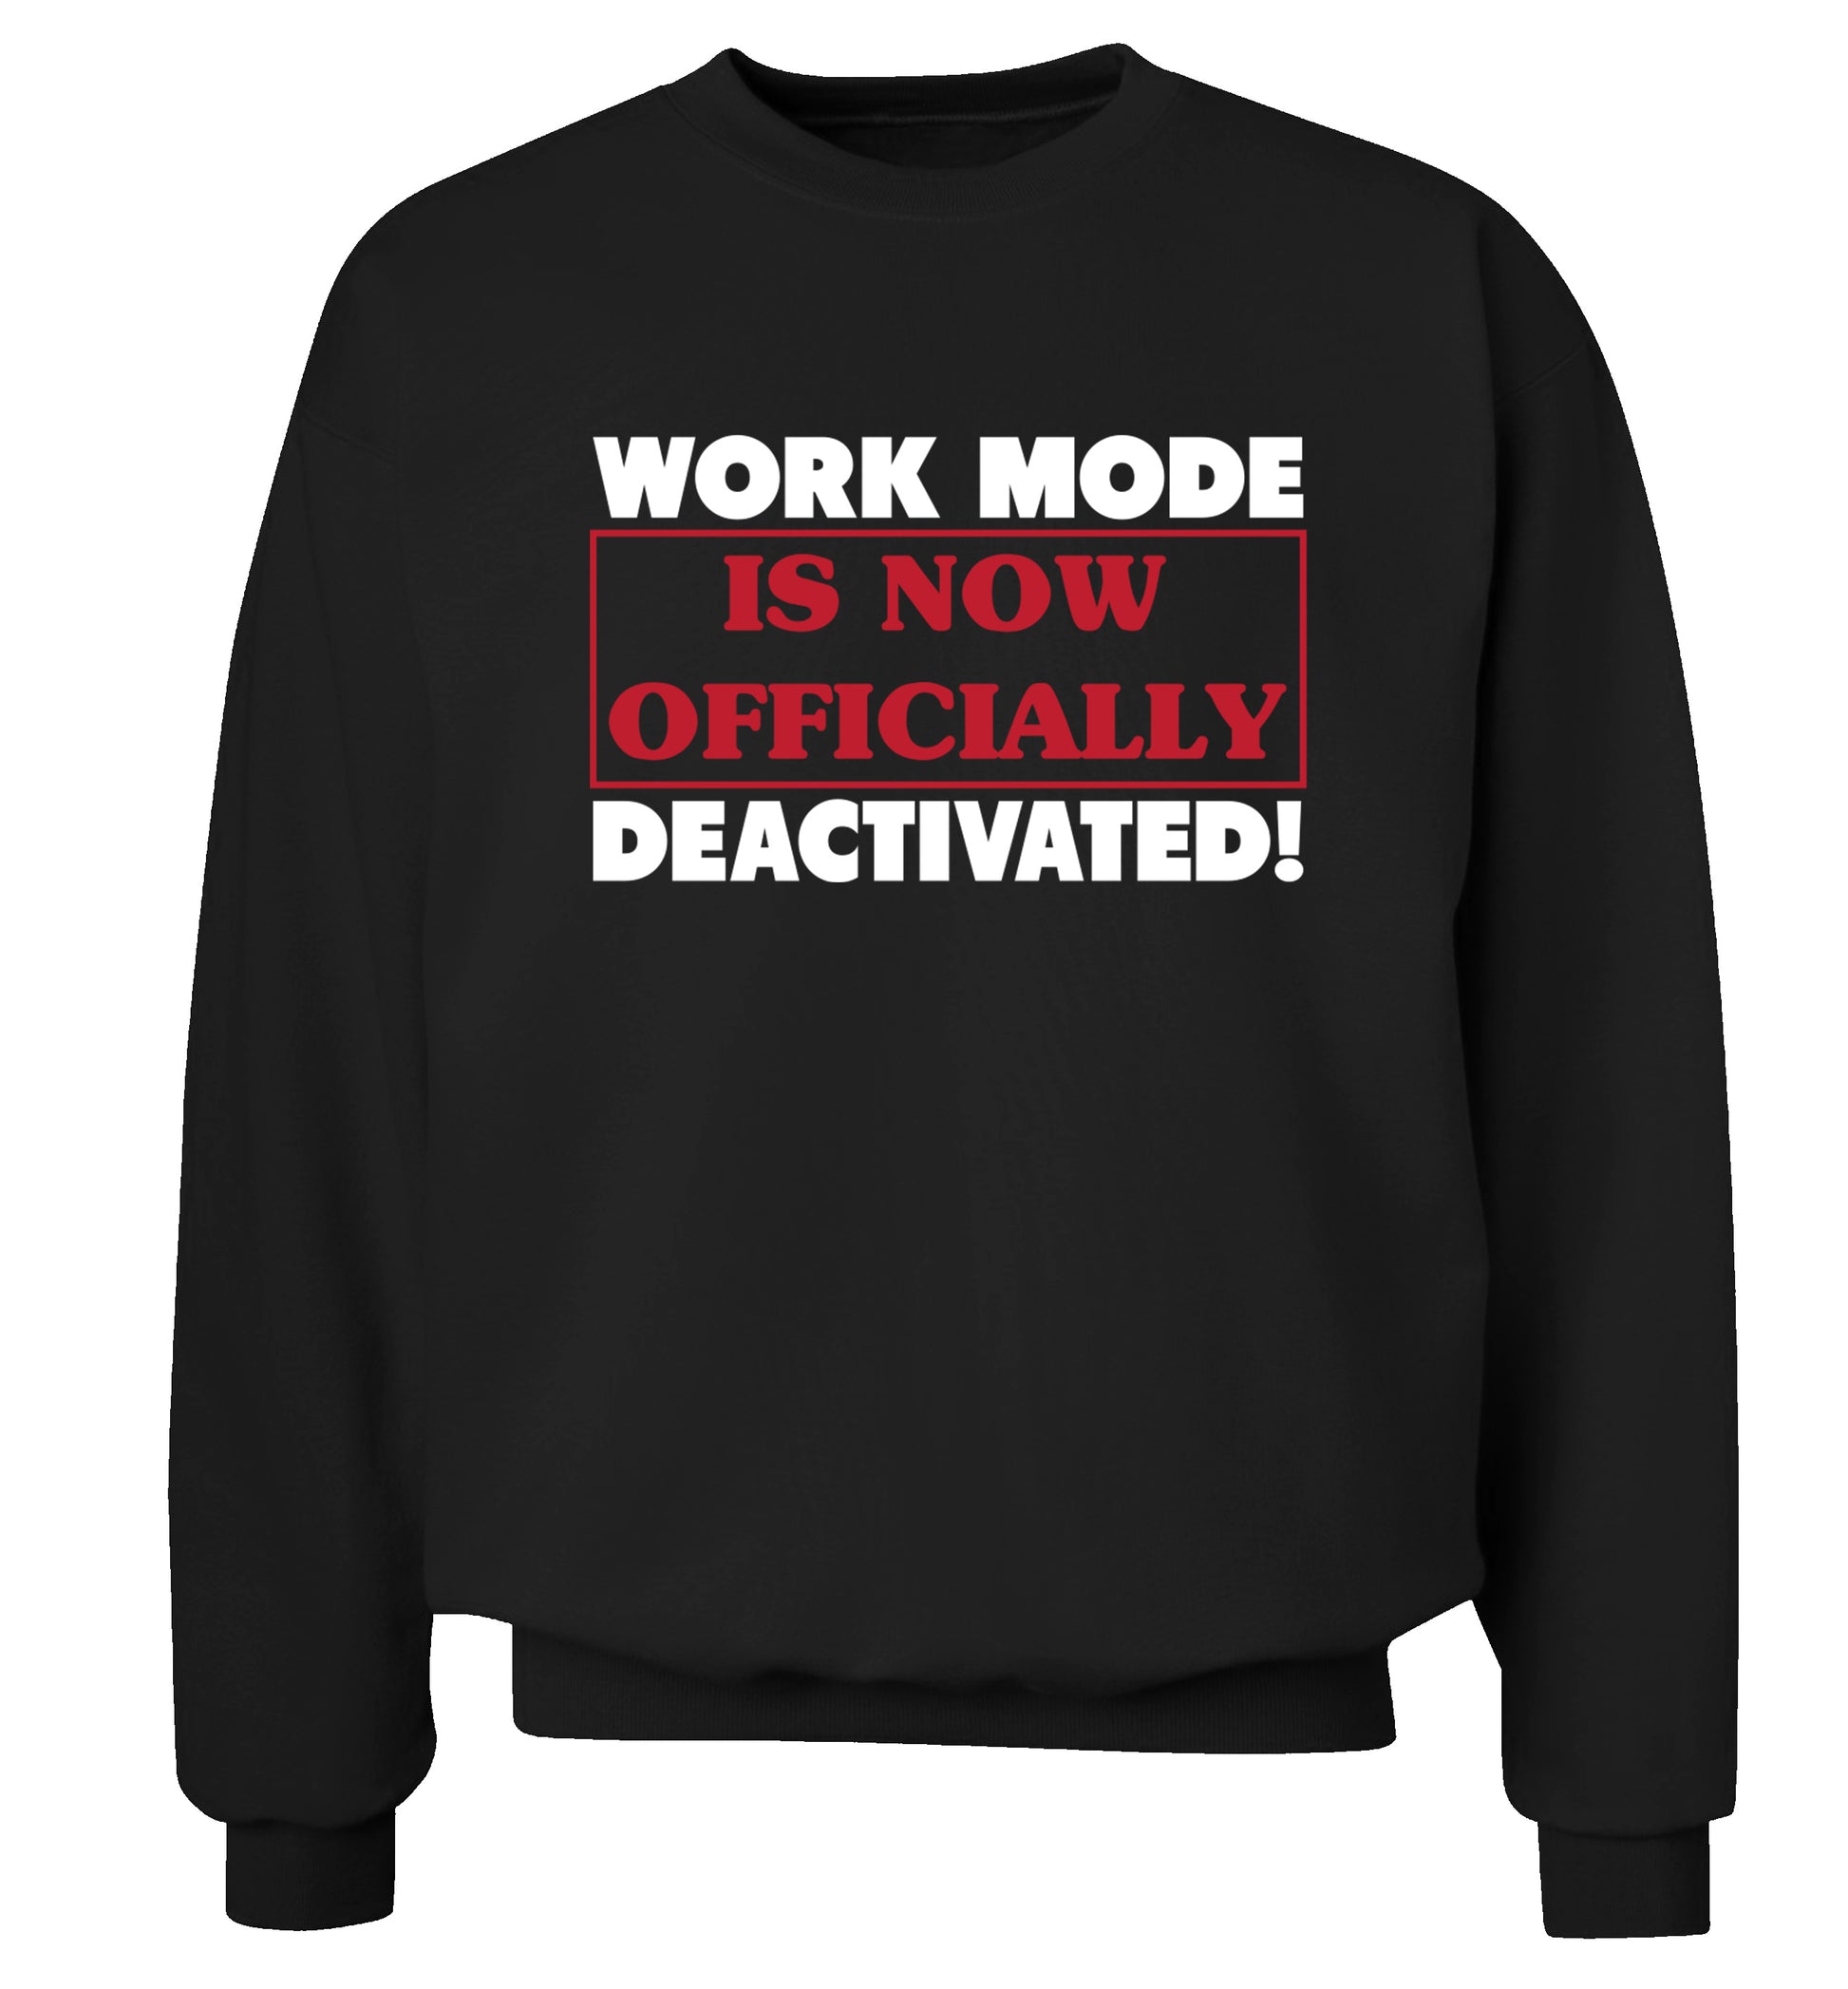 Work mode is now officially deactivated Adult's unisex black Sweater 2XL